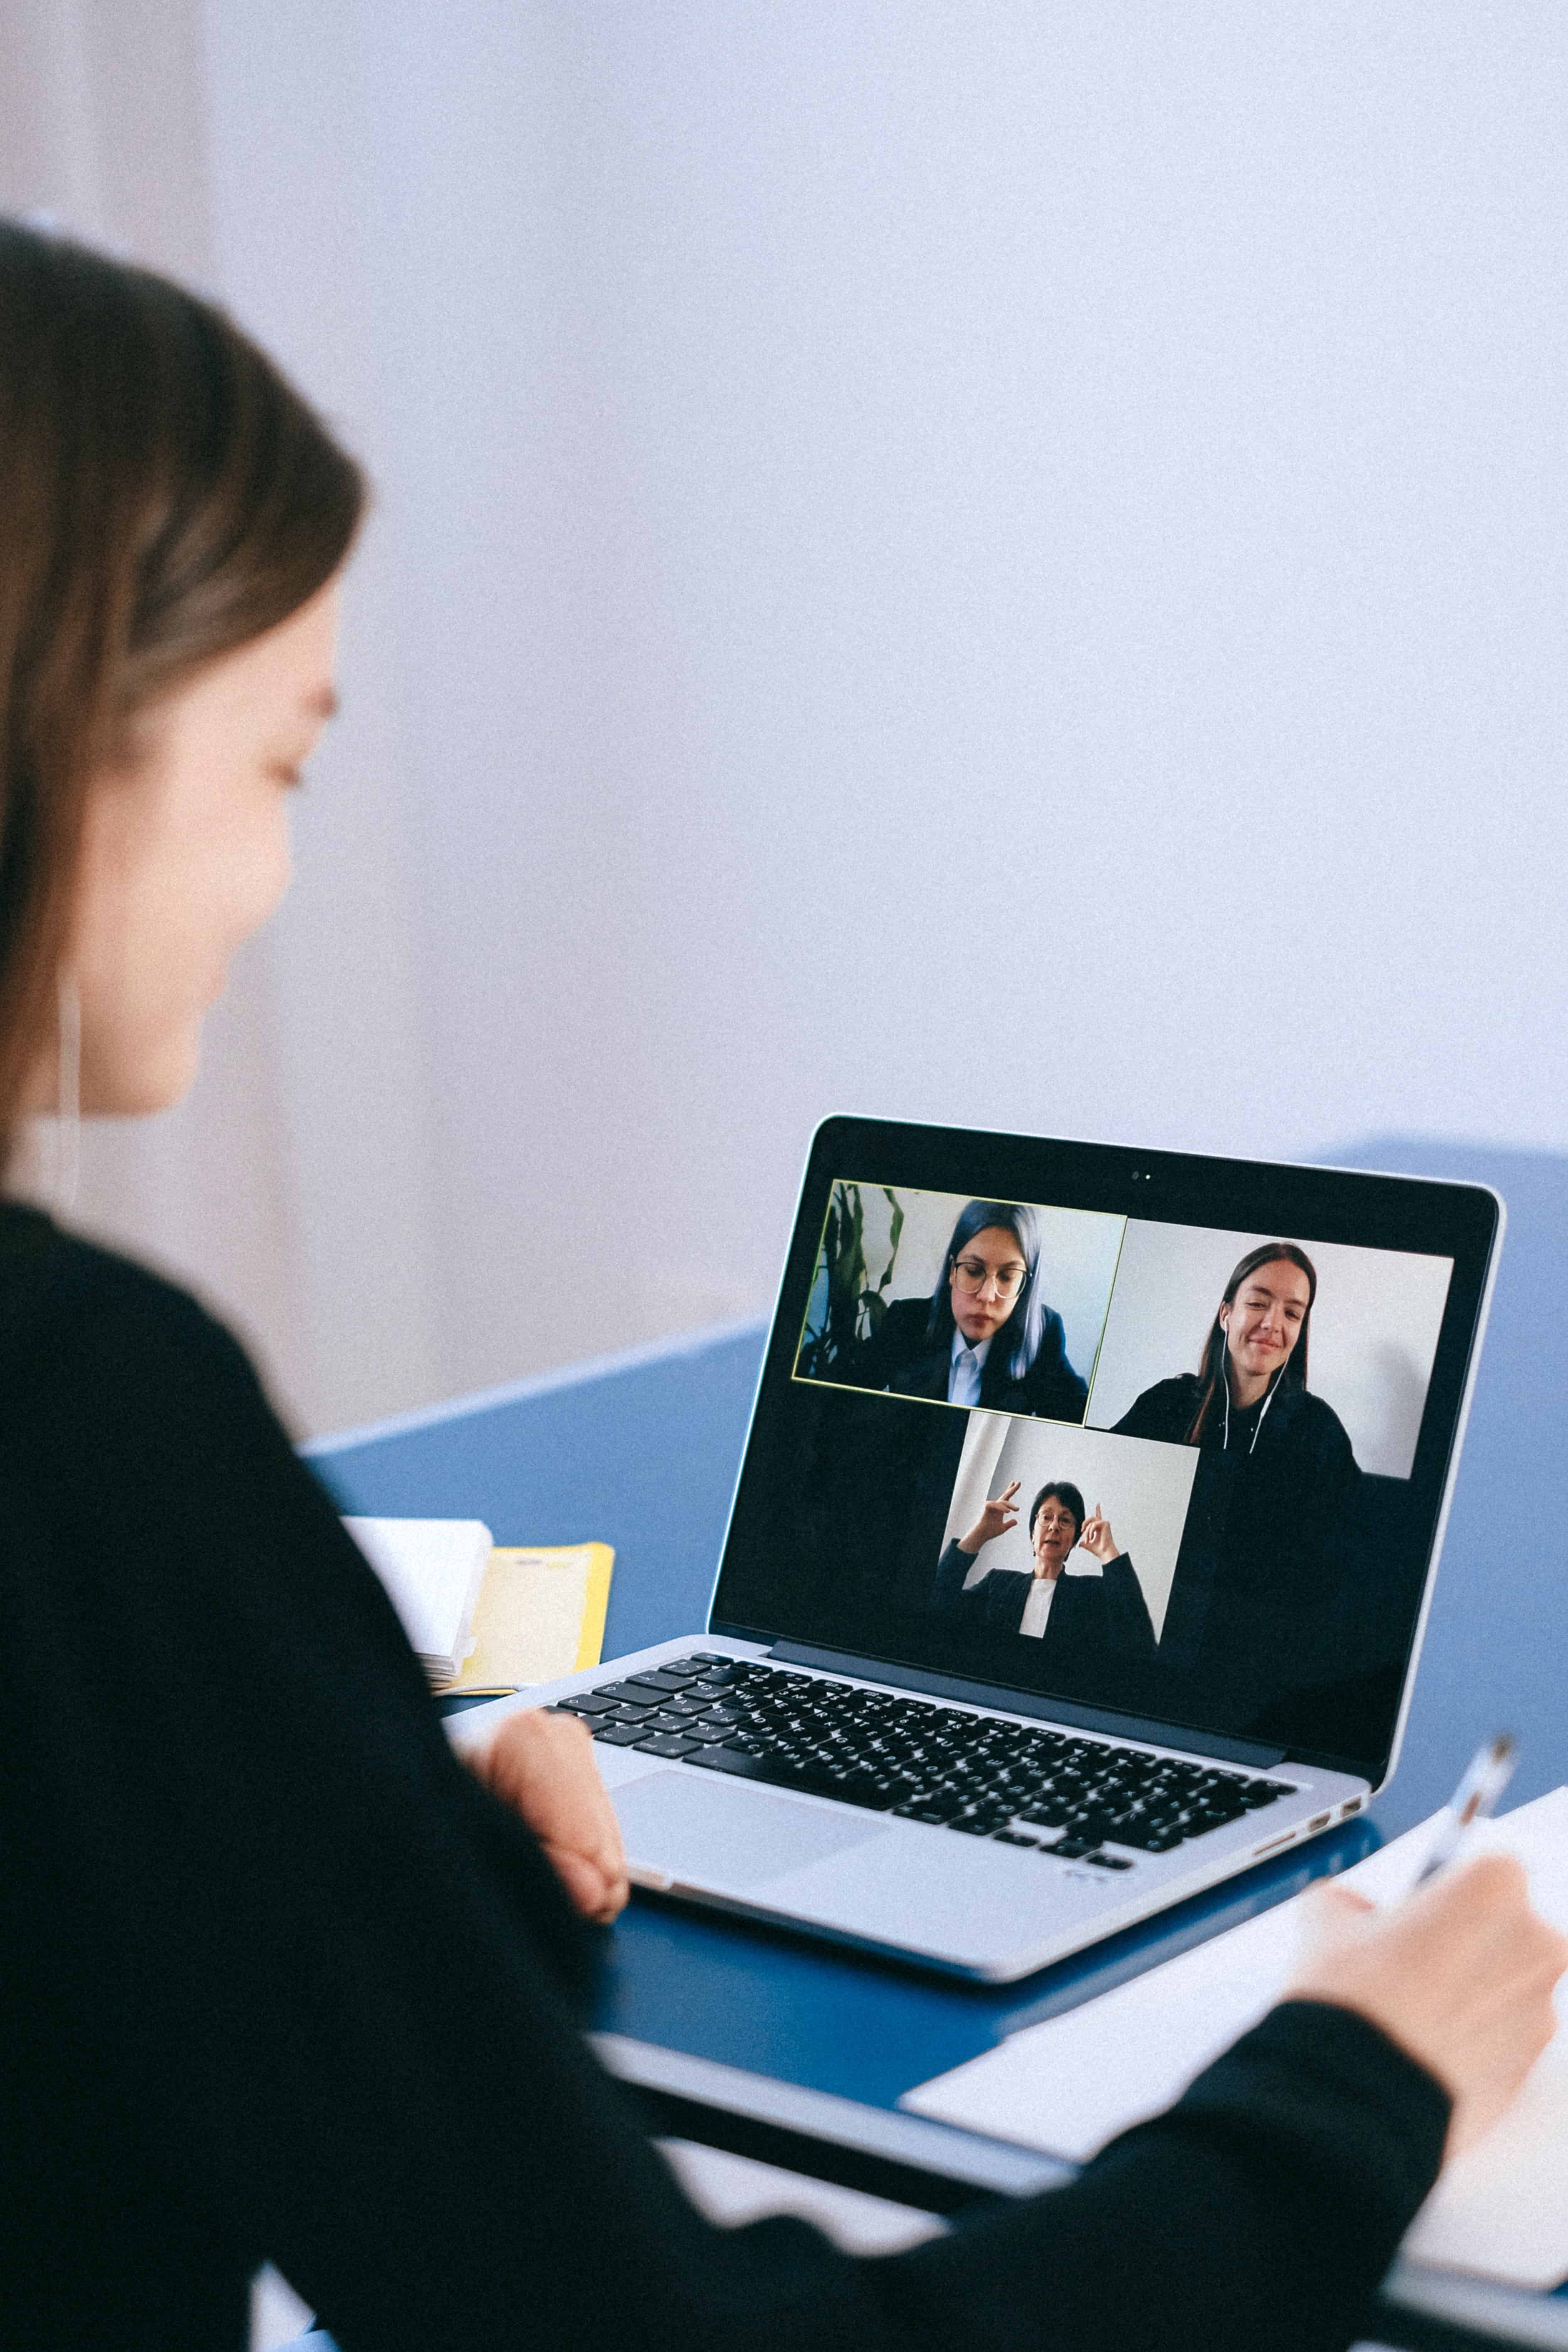 Woman in video call meeting, looking at a computer screen showing three other women.